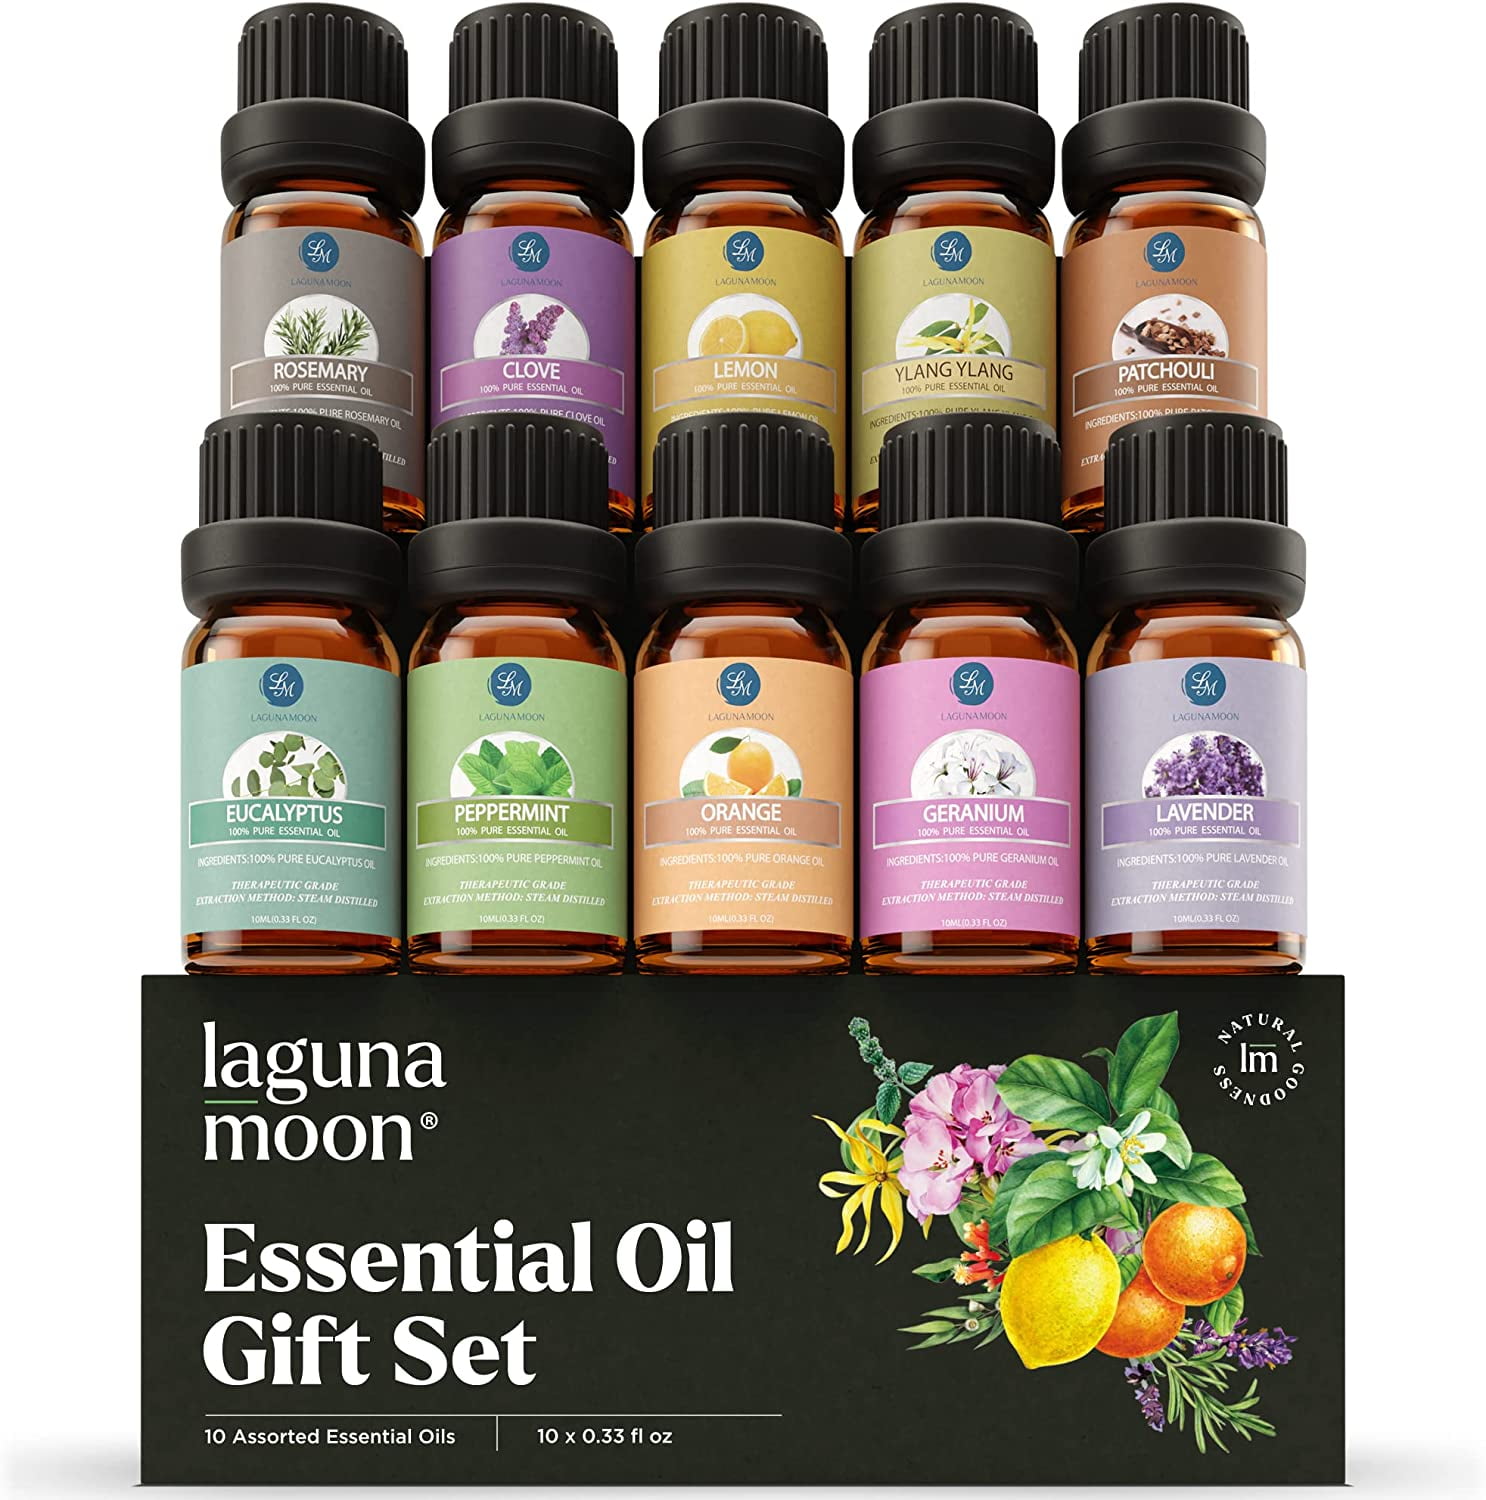  Spice Fragrance Oil Collection - Gift Set for Diffuser, DIY  Candle Making, Soap Scents, Slime, Air Freshener, Aromatherapy - Cinnamon,  Cloves, Citronella, Ginger, Bergamot and Spiced Berries (10mL) : Health &  Household